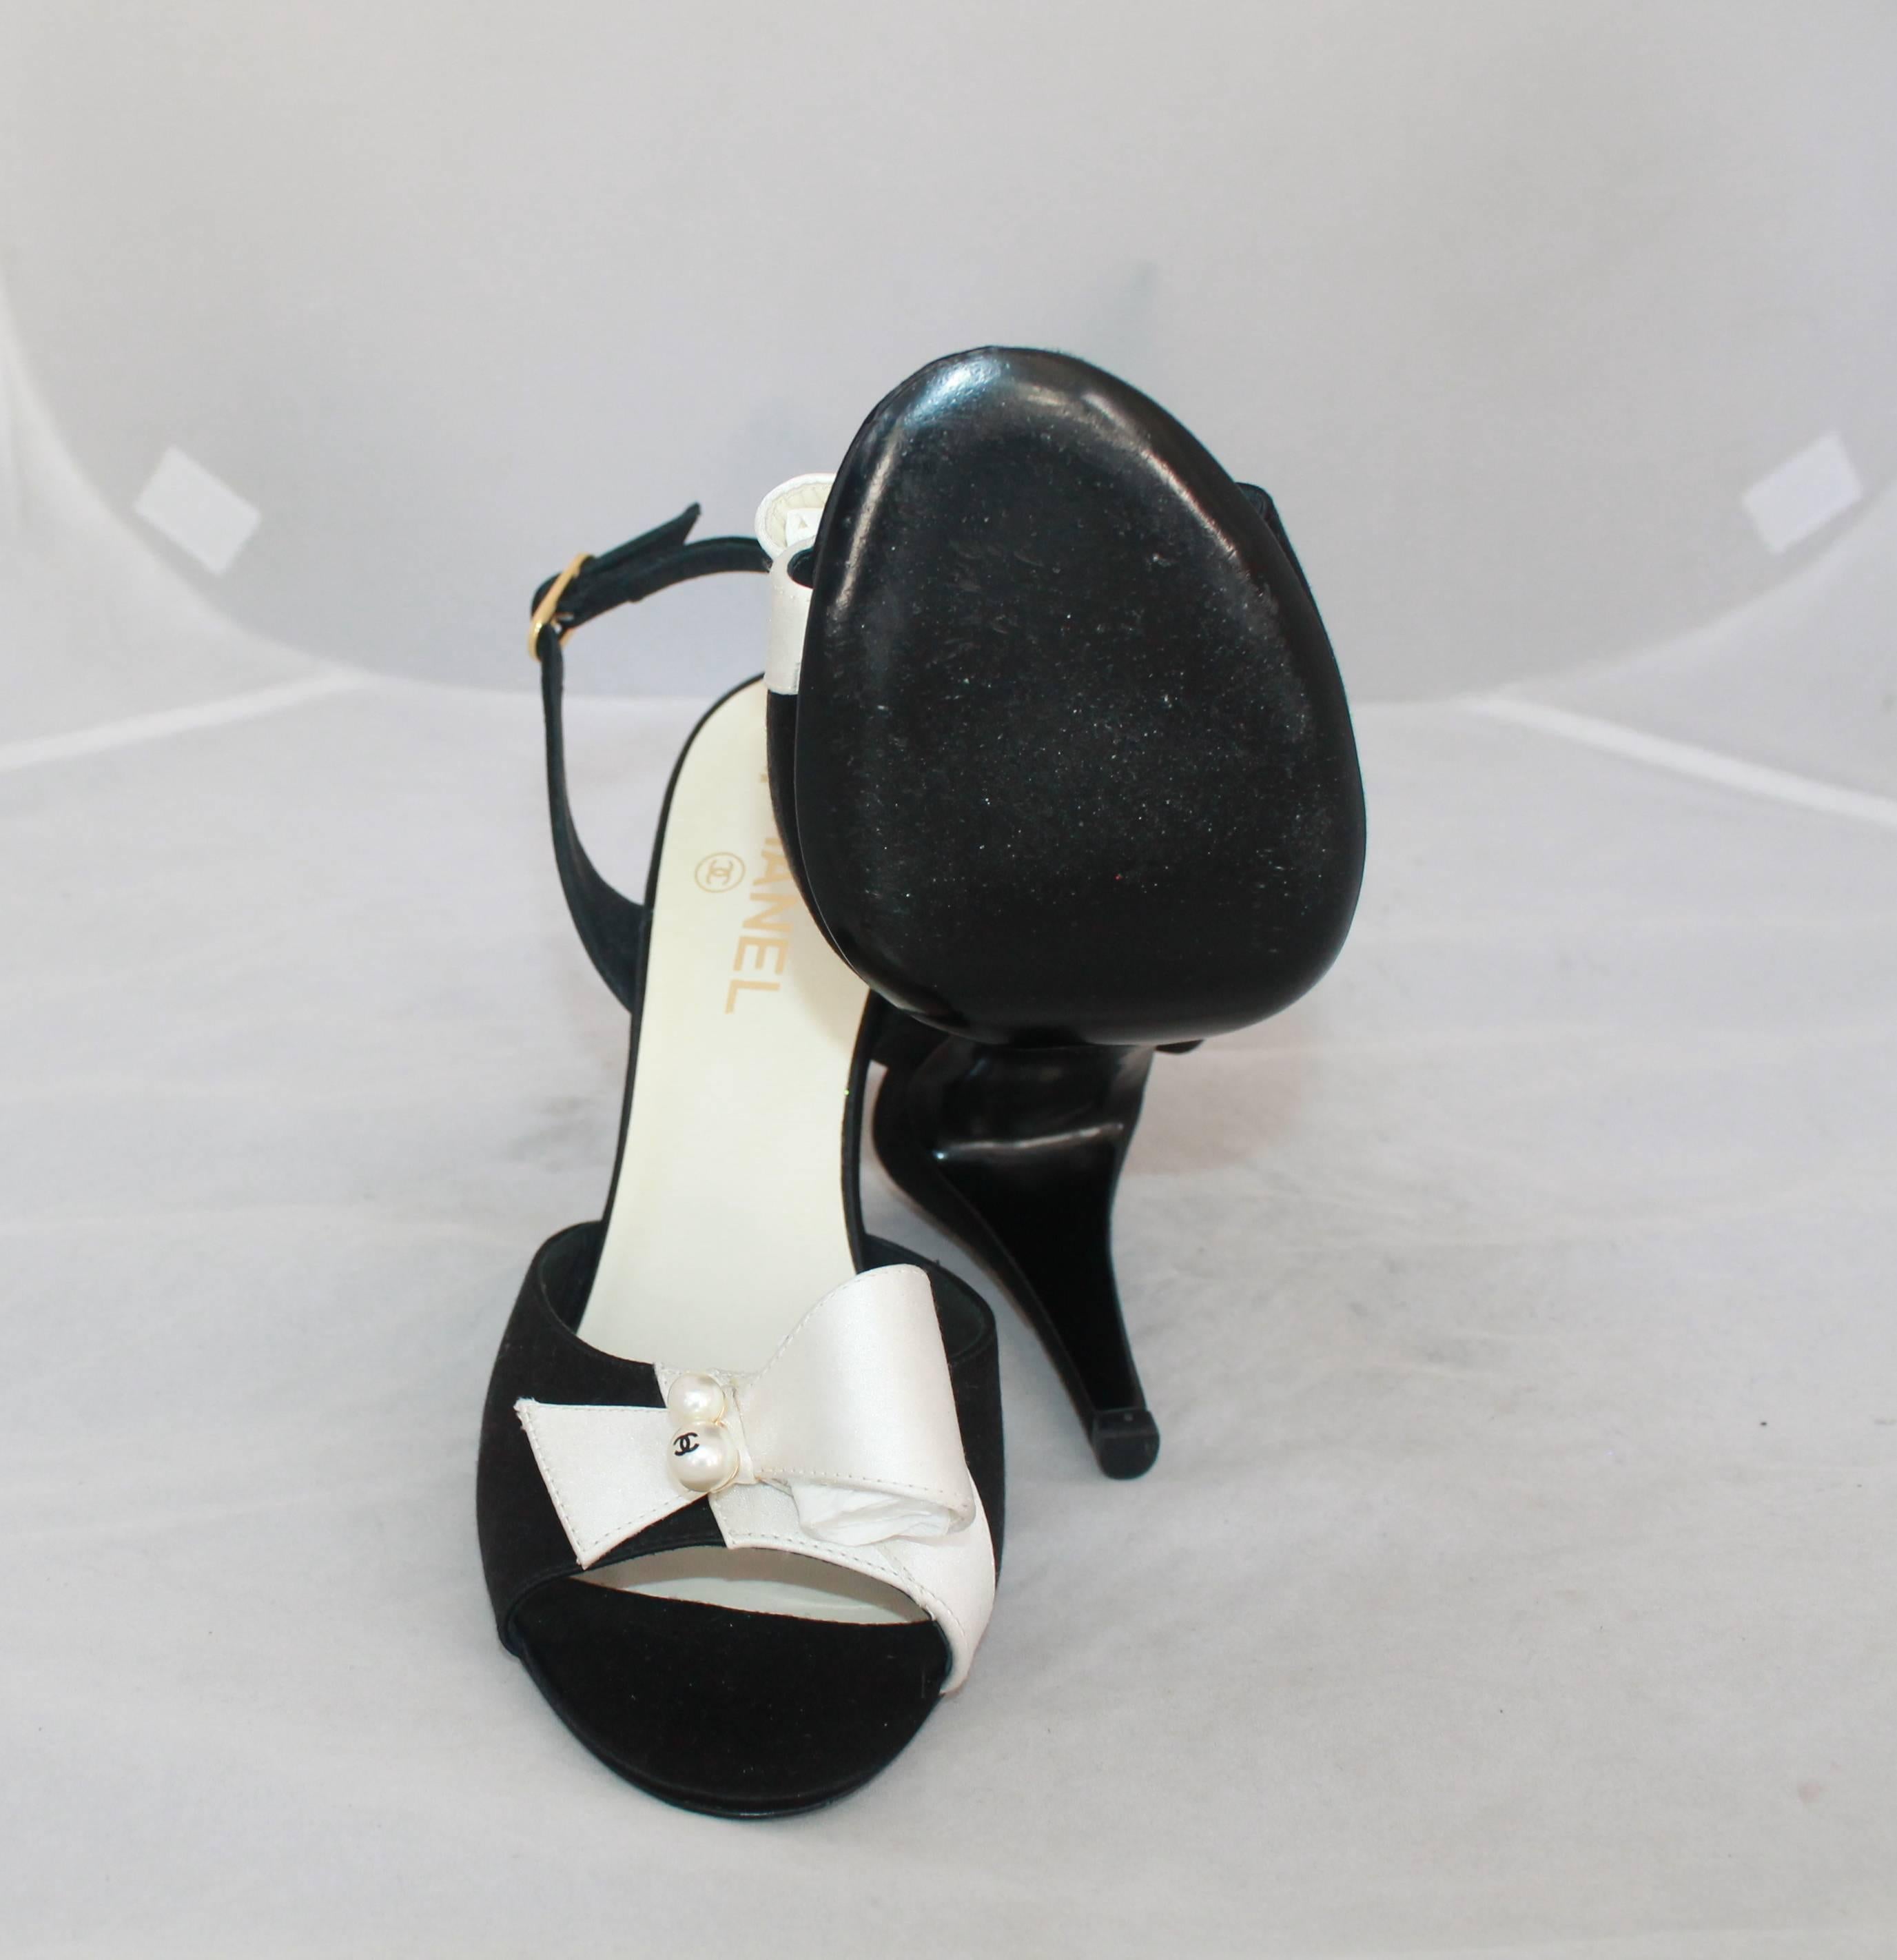 Chanel Black & Ivory Satin Open-Toe Sling Back Sandals w/ Front Bow - 40 1